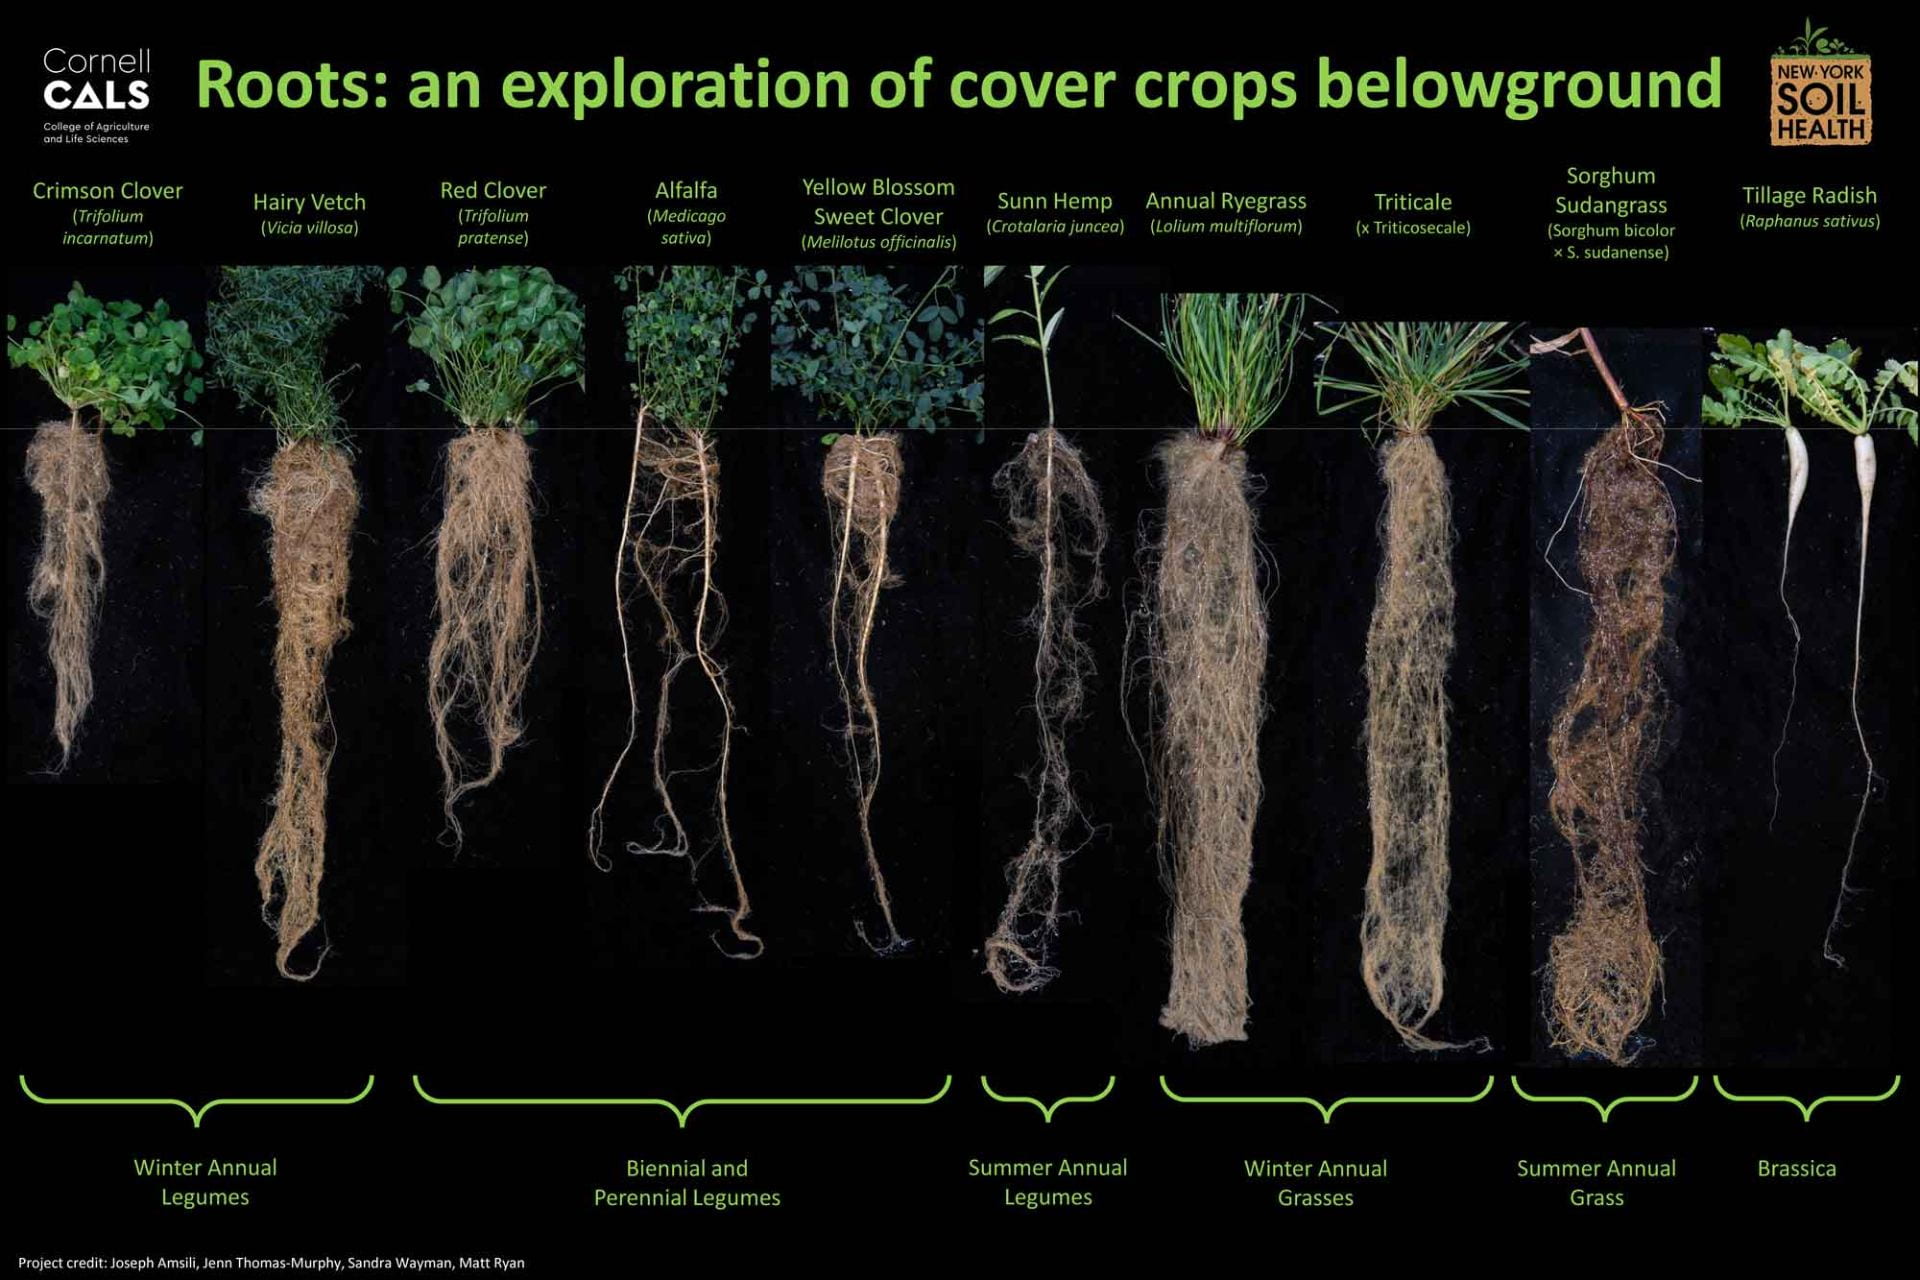 small image of poster showing cover crop roots below ground